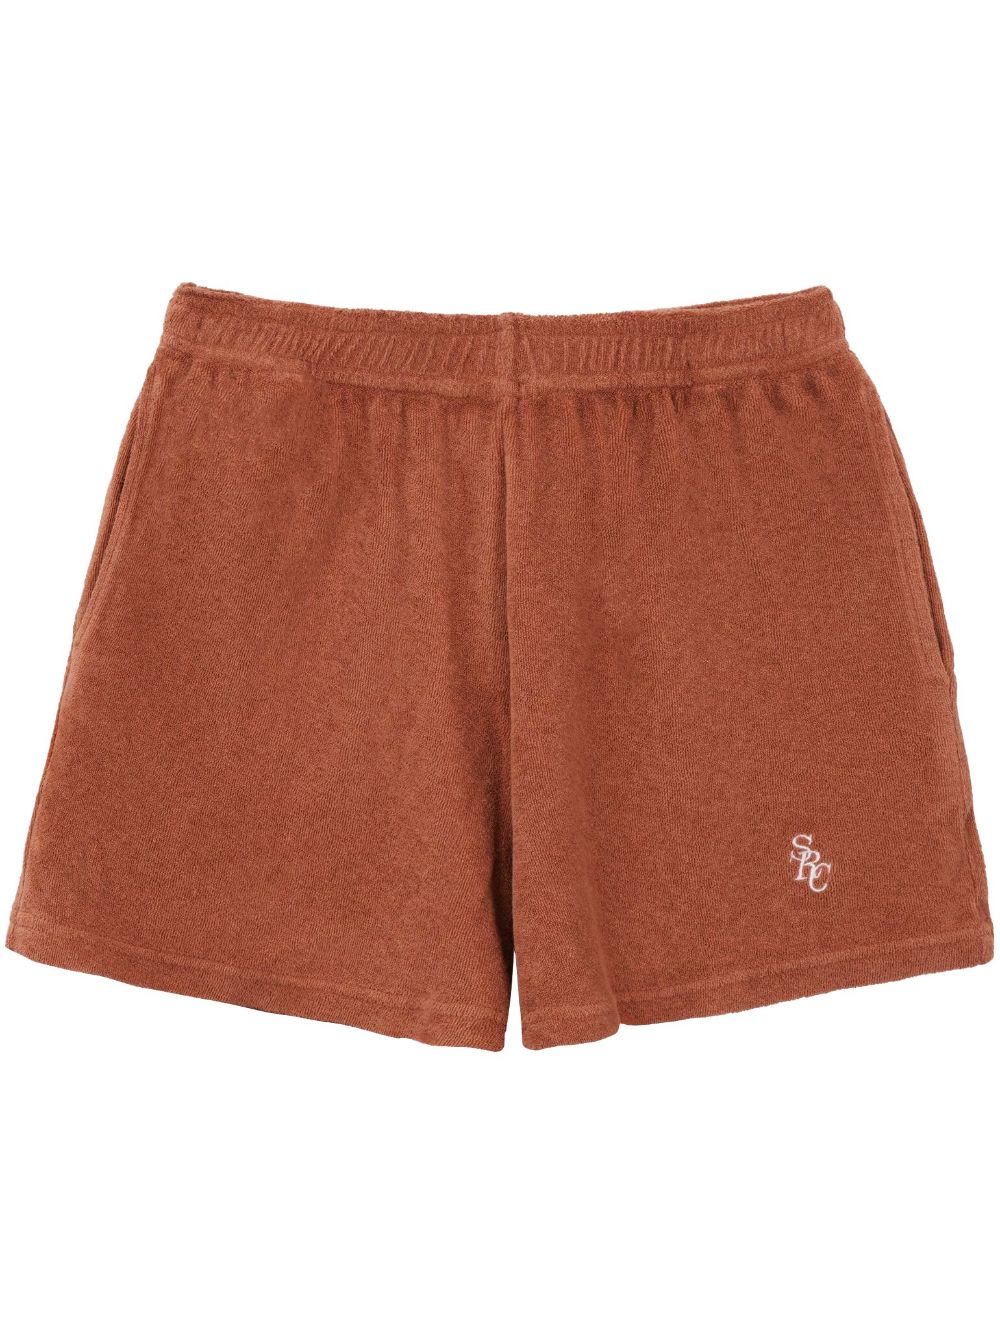 Sporty & Rich logo-embroidered towelling-finish shorts - Orange von Sporty & Rich